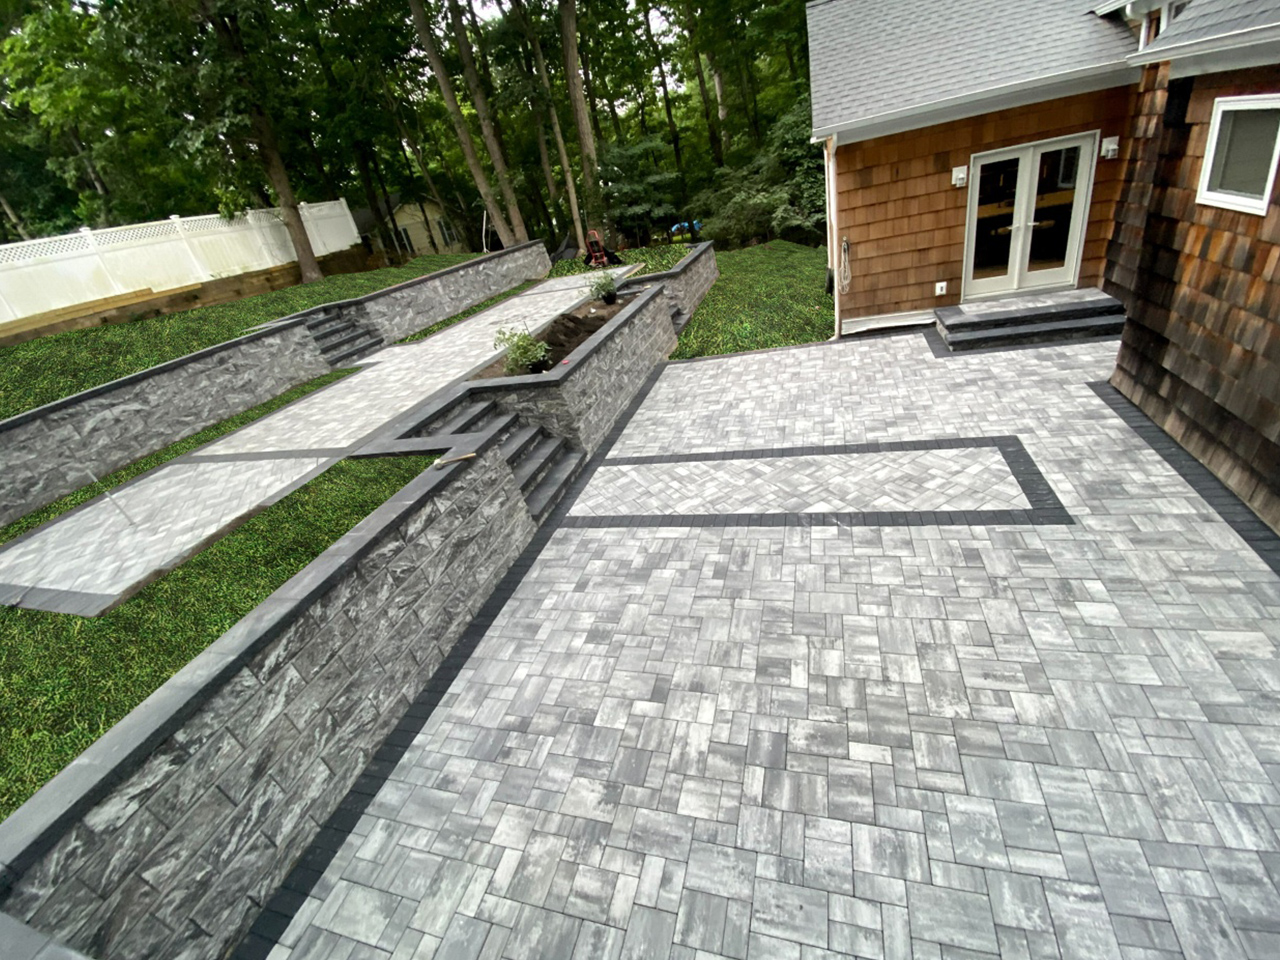 Cheaply priced limestone retaining wall next to a patio